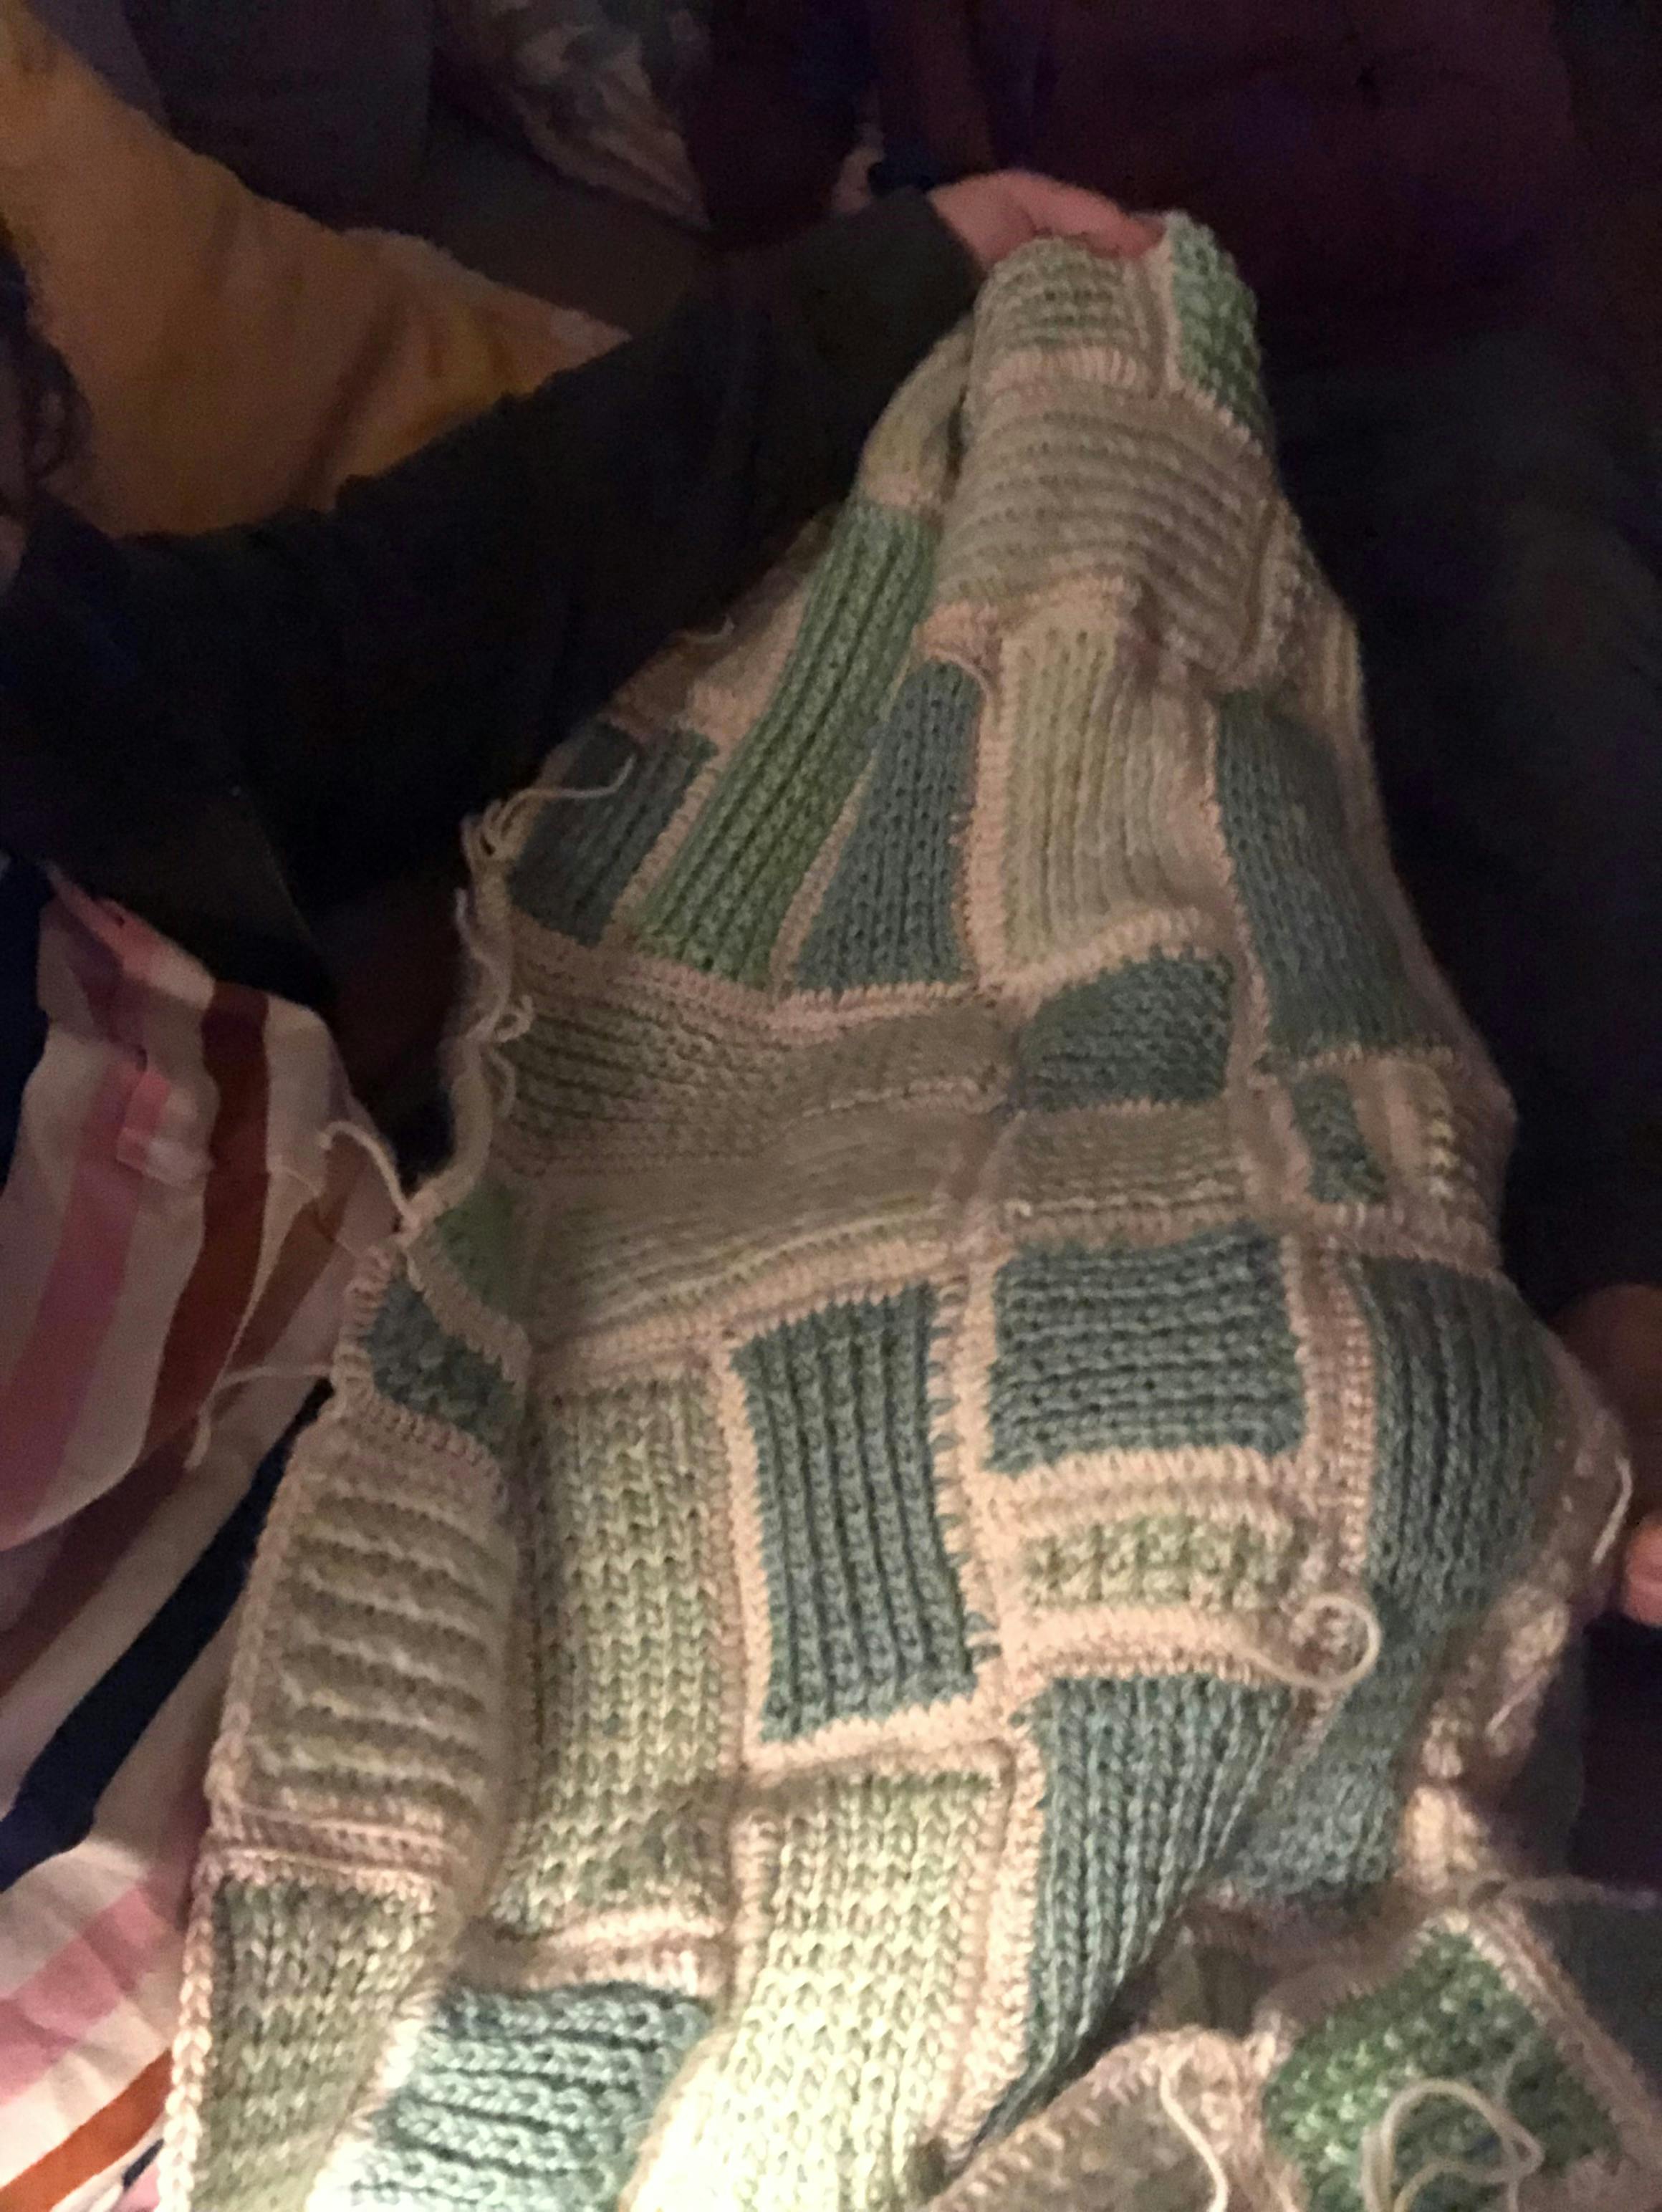 A picture of the green and white blanket I knit for Rhea's birth.